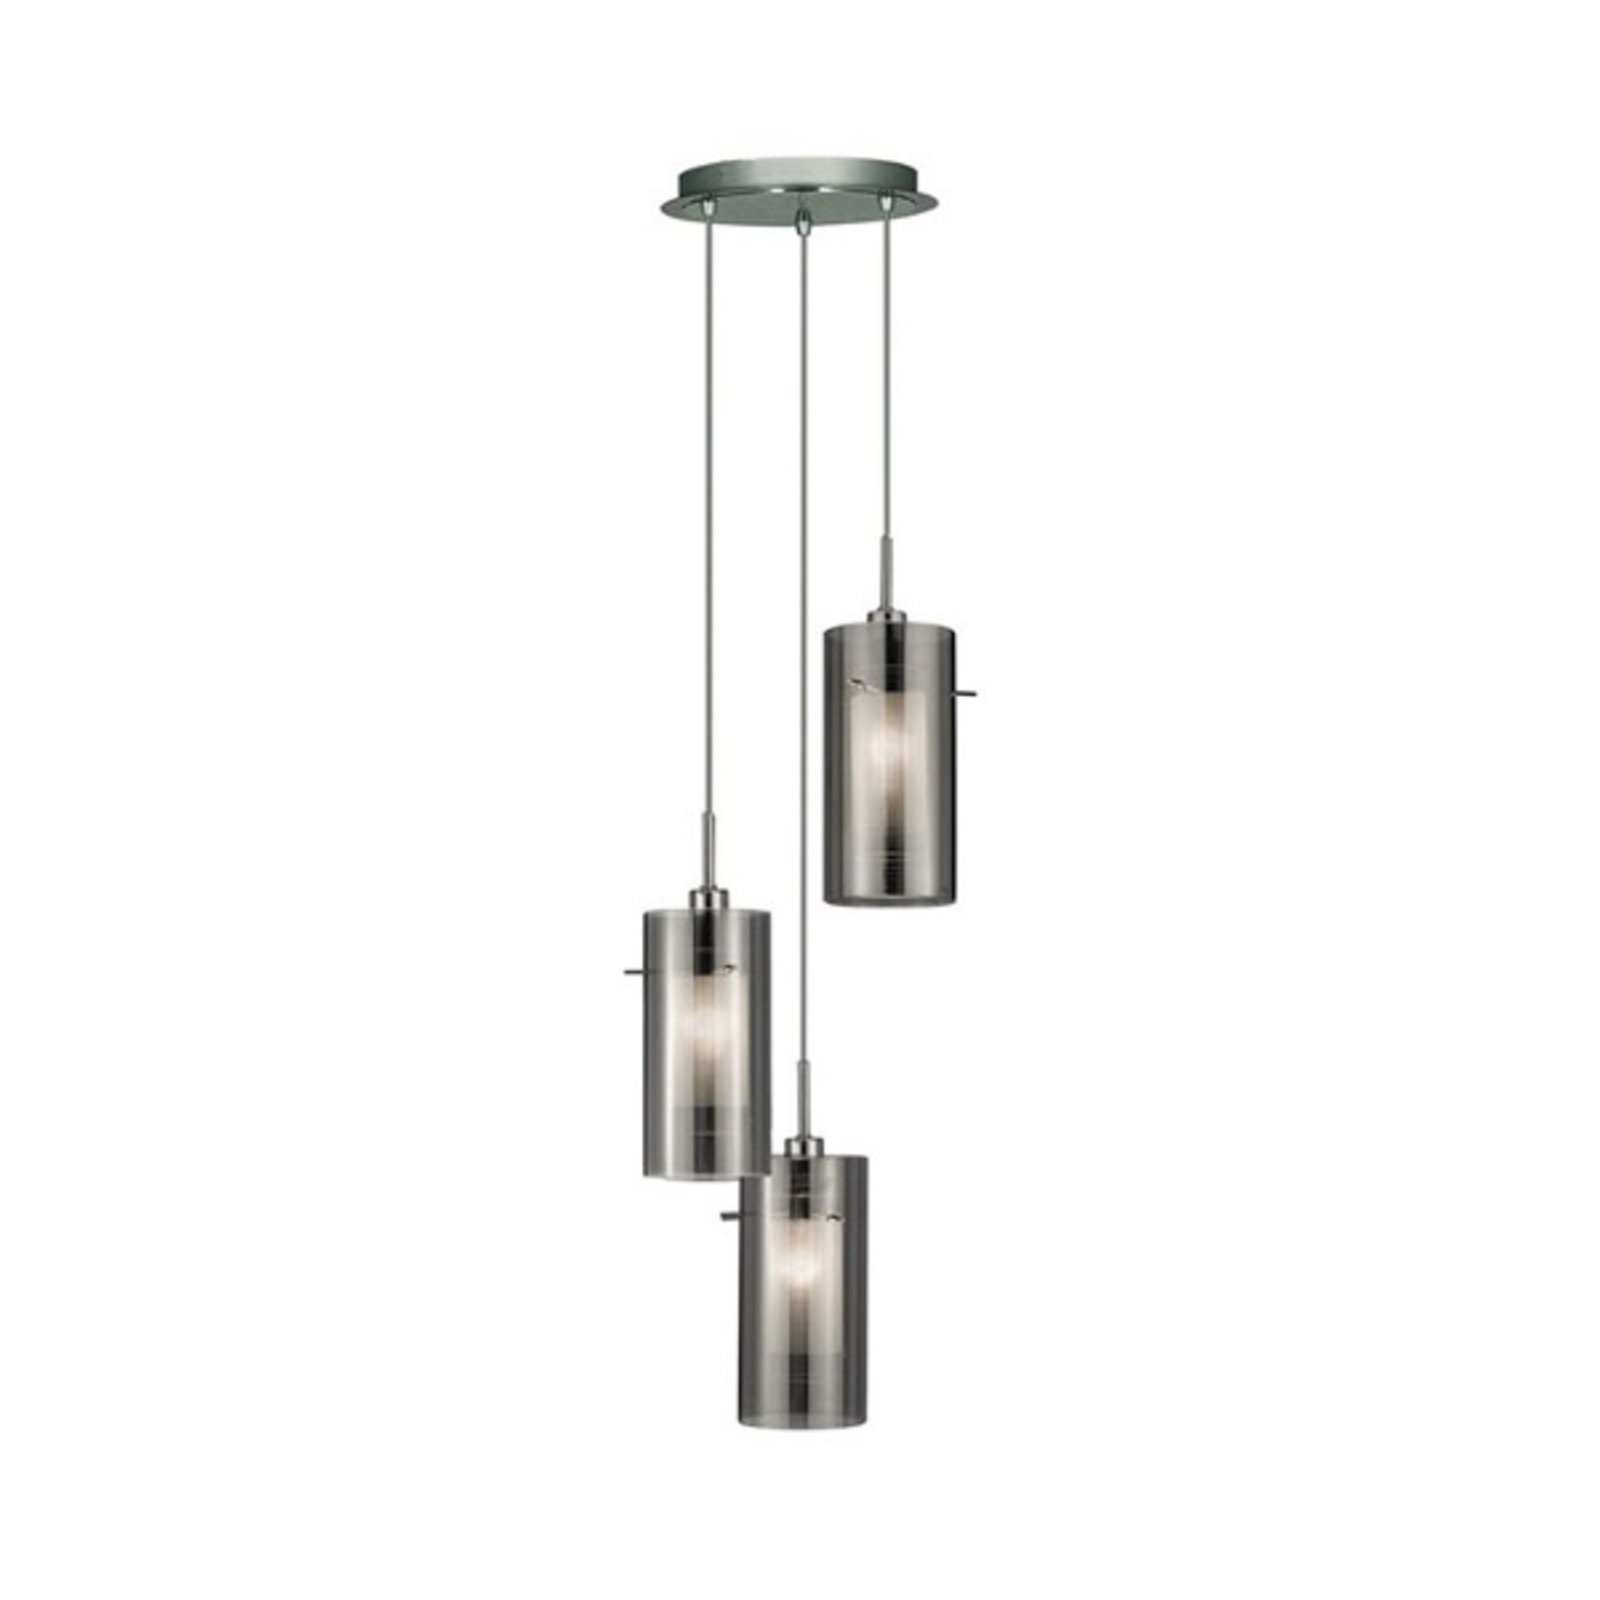 Hanglamp Duo 2 rookglas/chroom rond 3-lamps